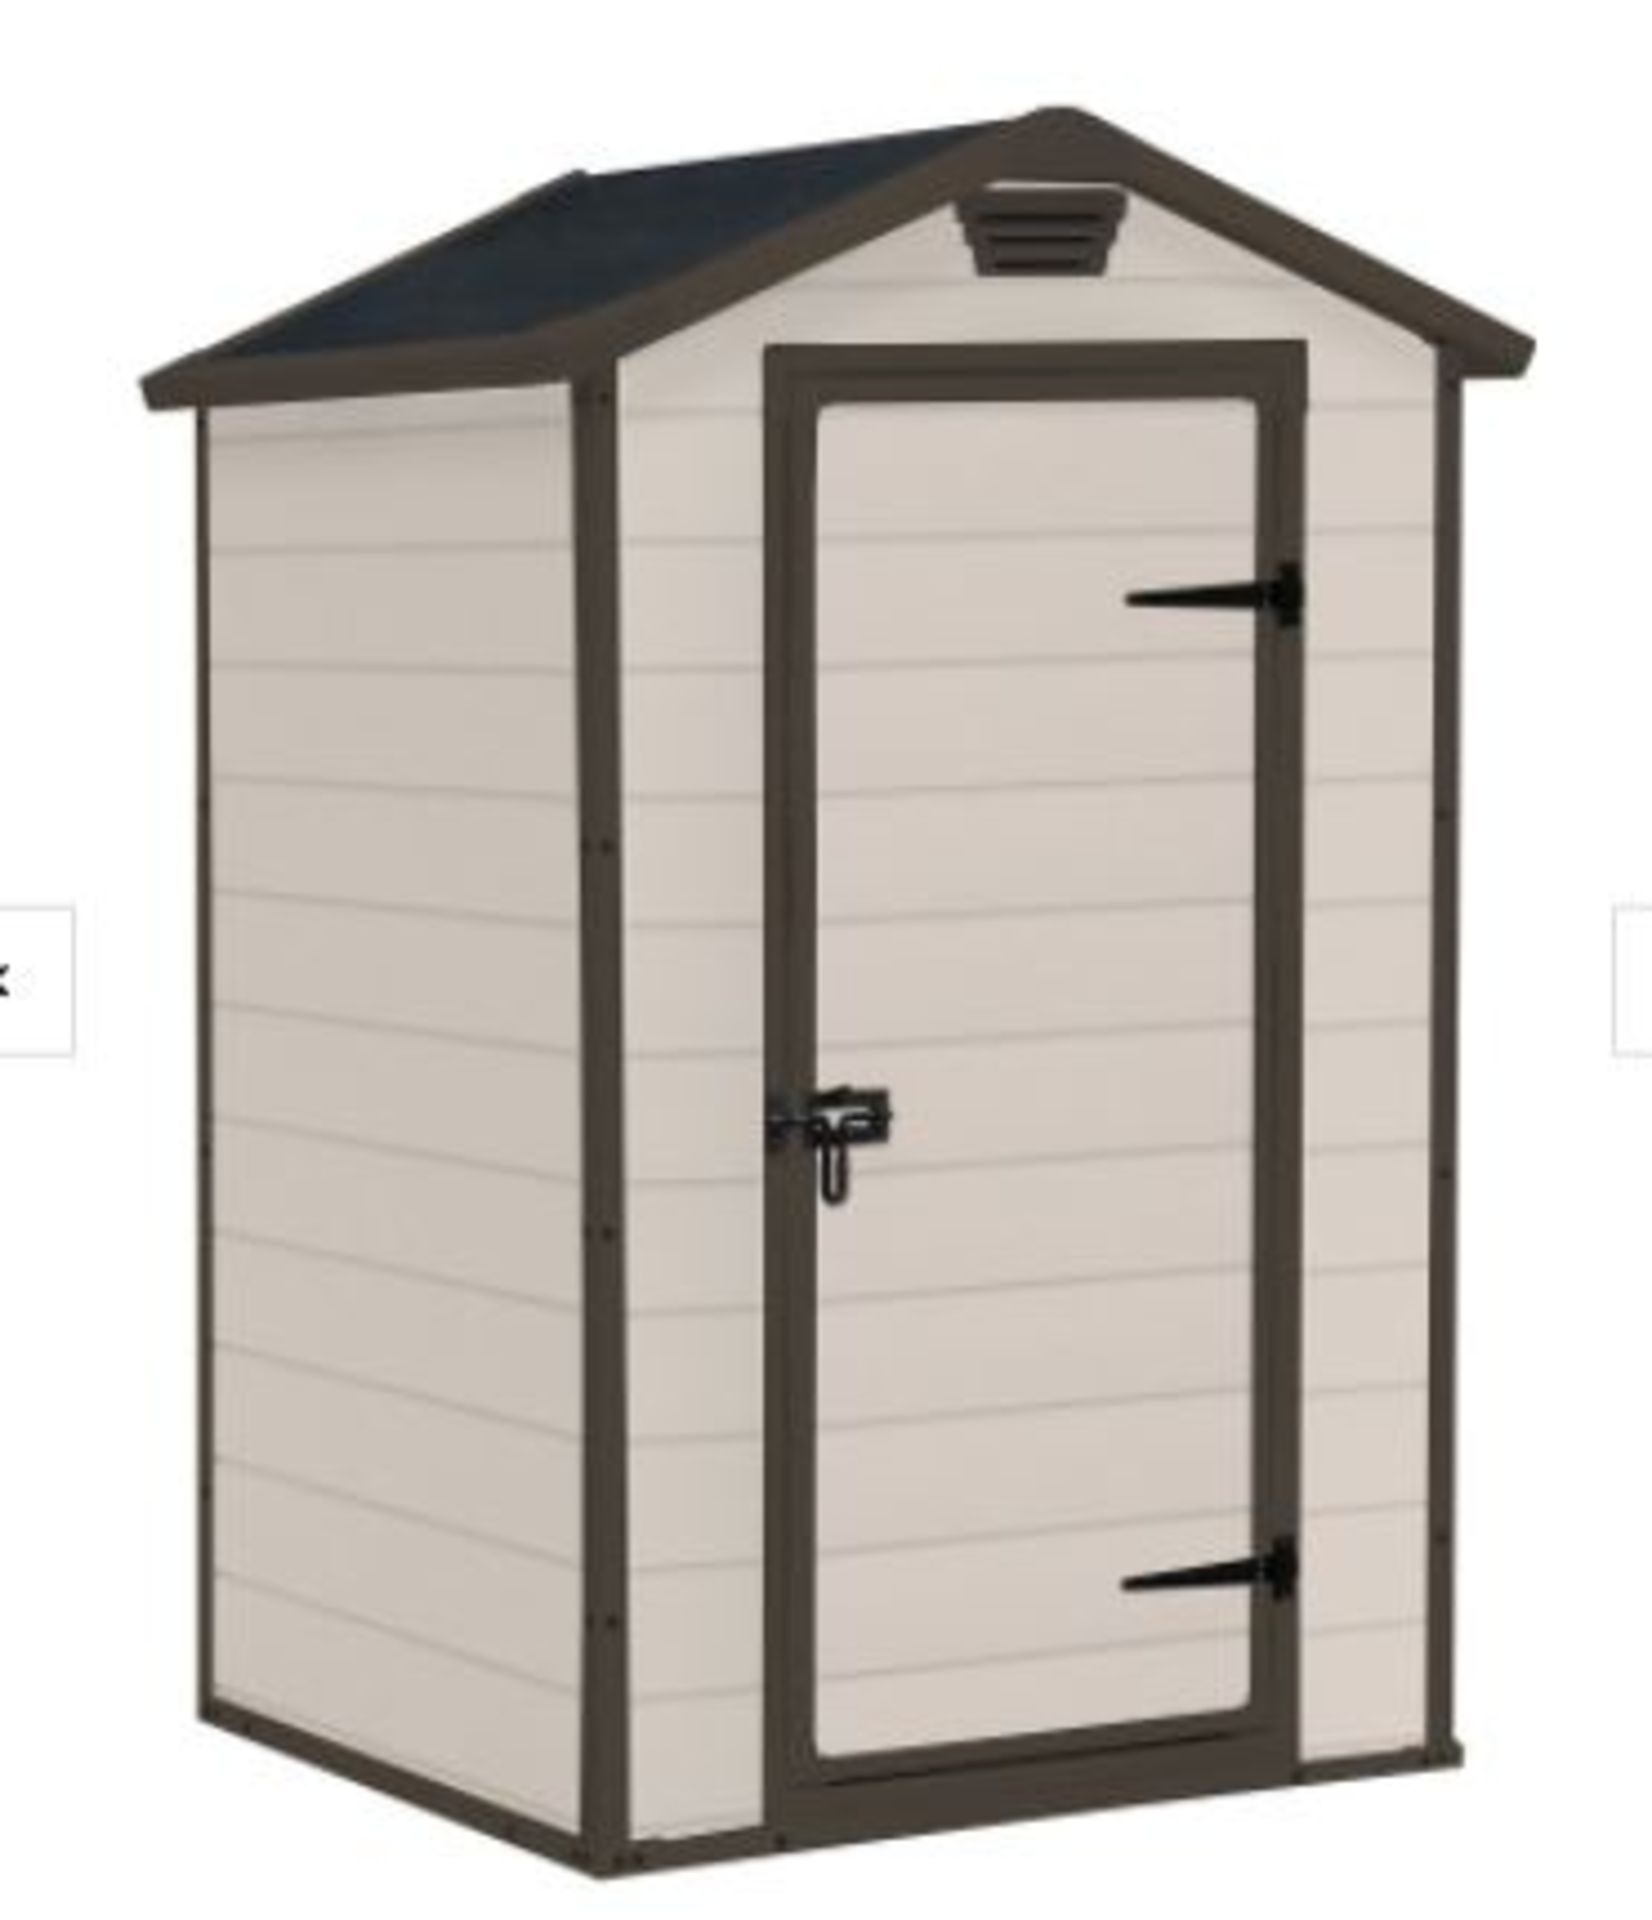 (R7N) Garden. (R9) Garden . 1 X Keter Manor 4 X 3 Maintenance Free Shed (W129 X D103 X H196cm) RRP - Image 2 of 5